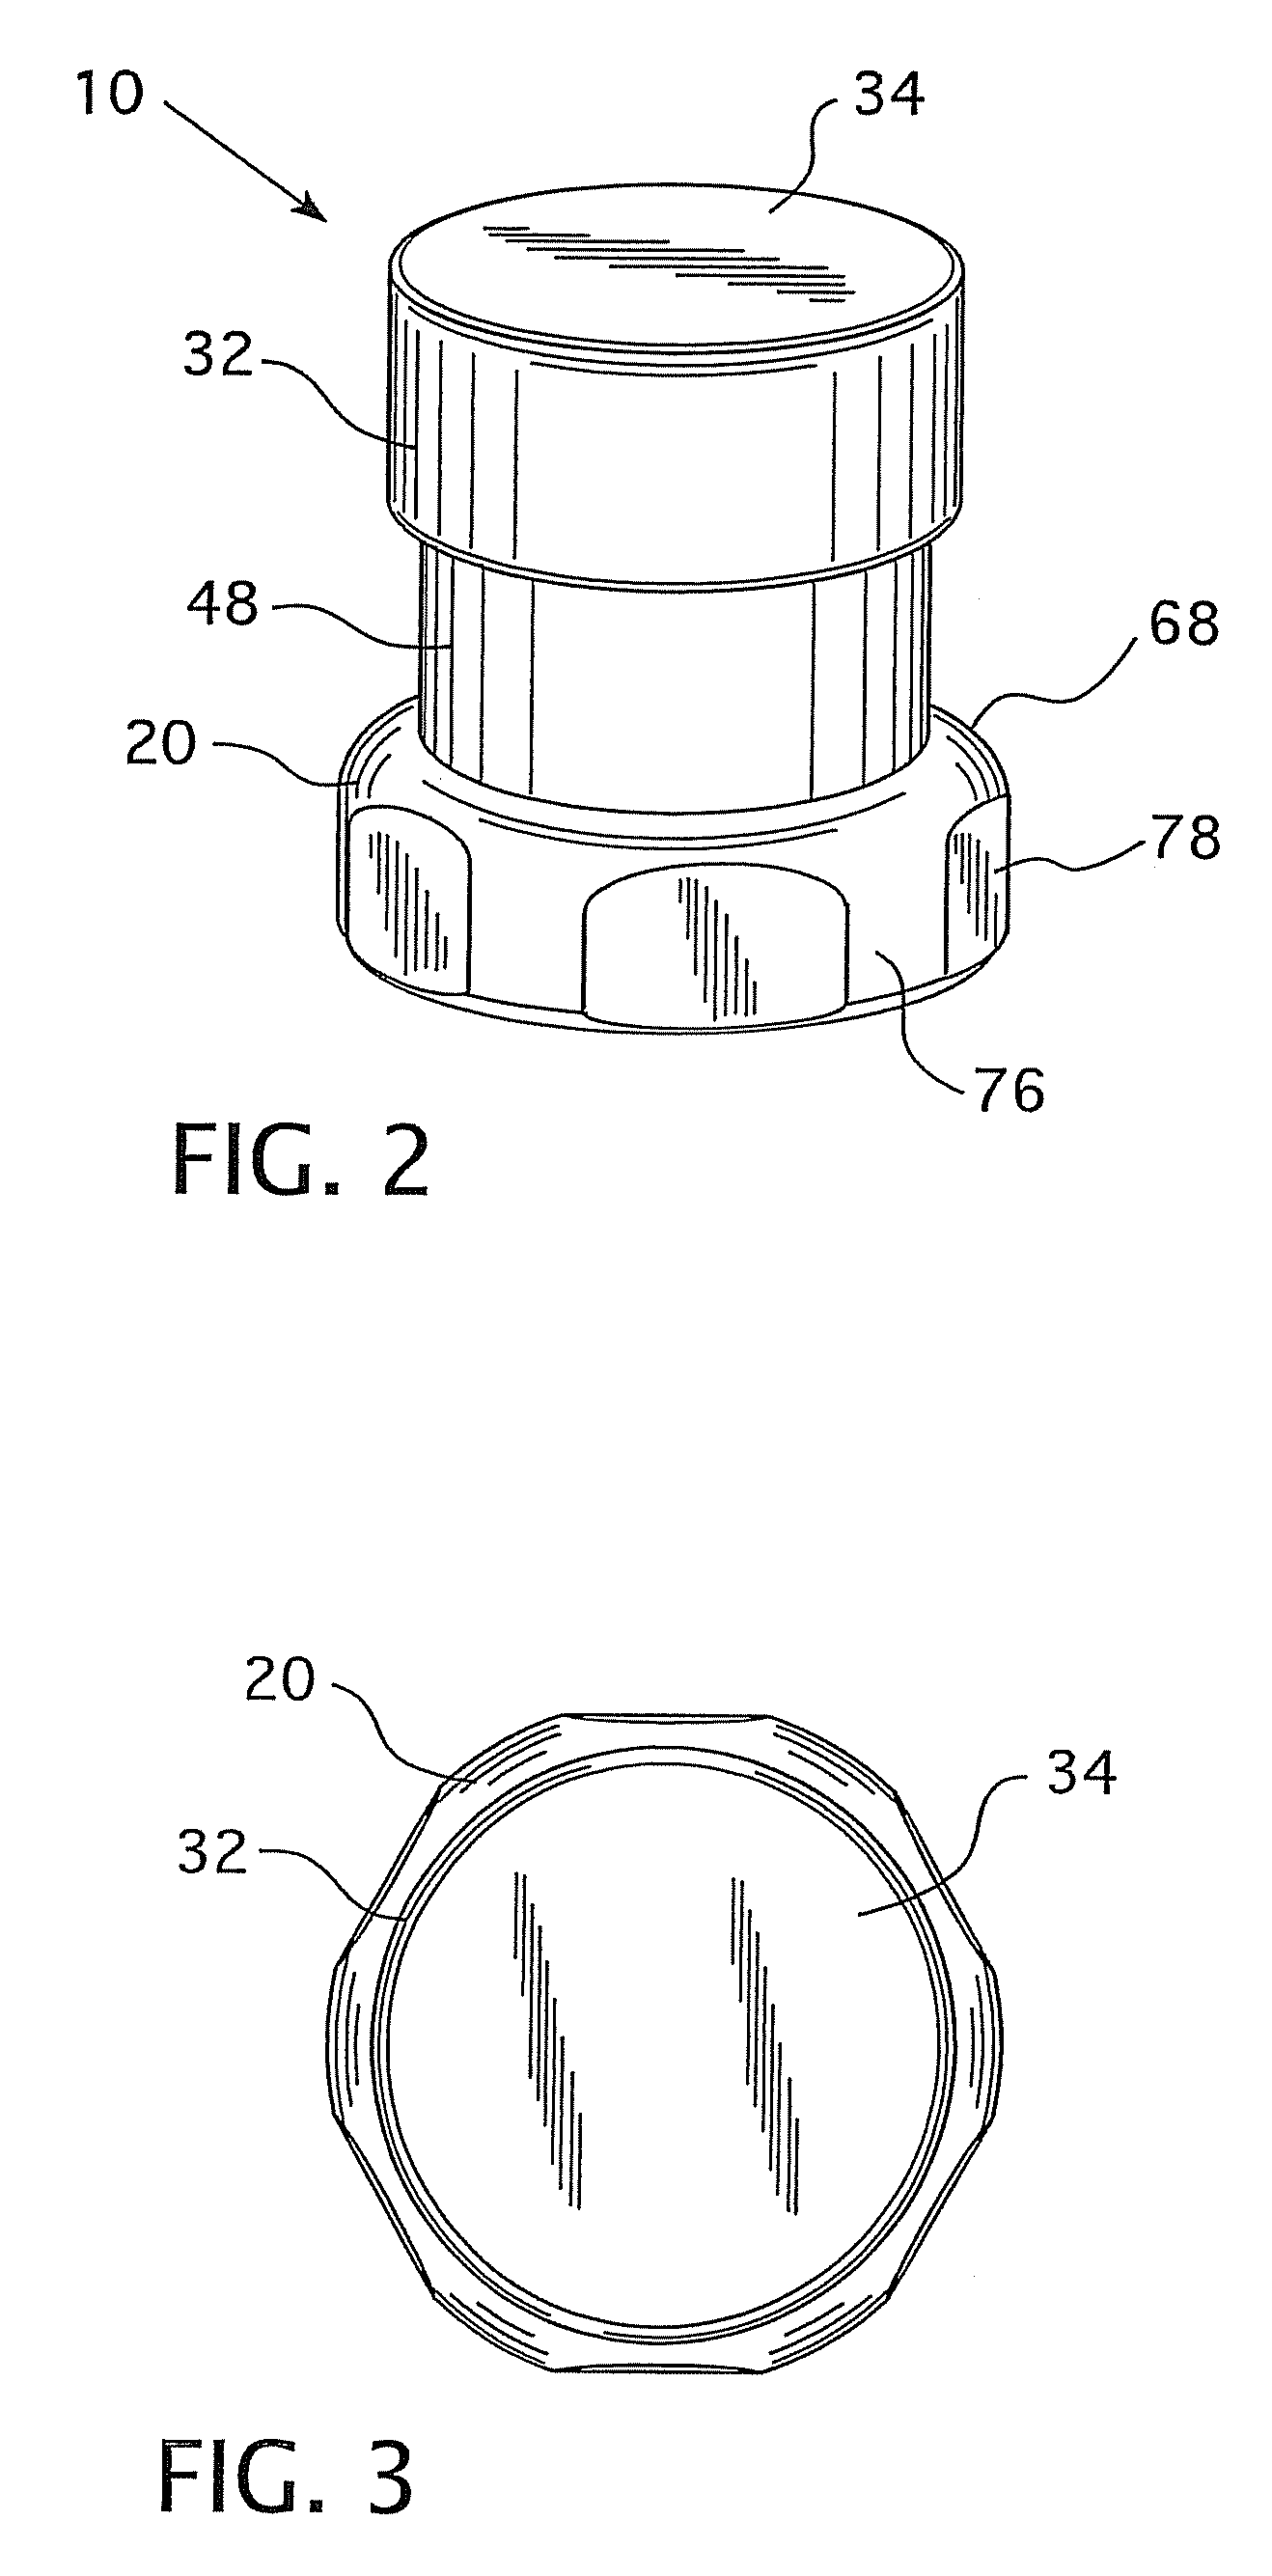 Institutional handle assembly